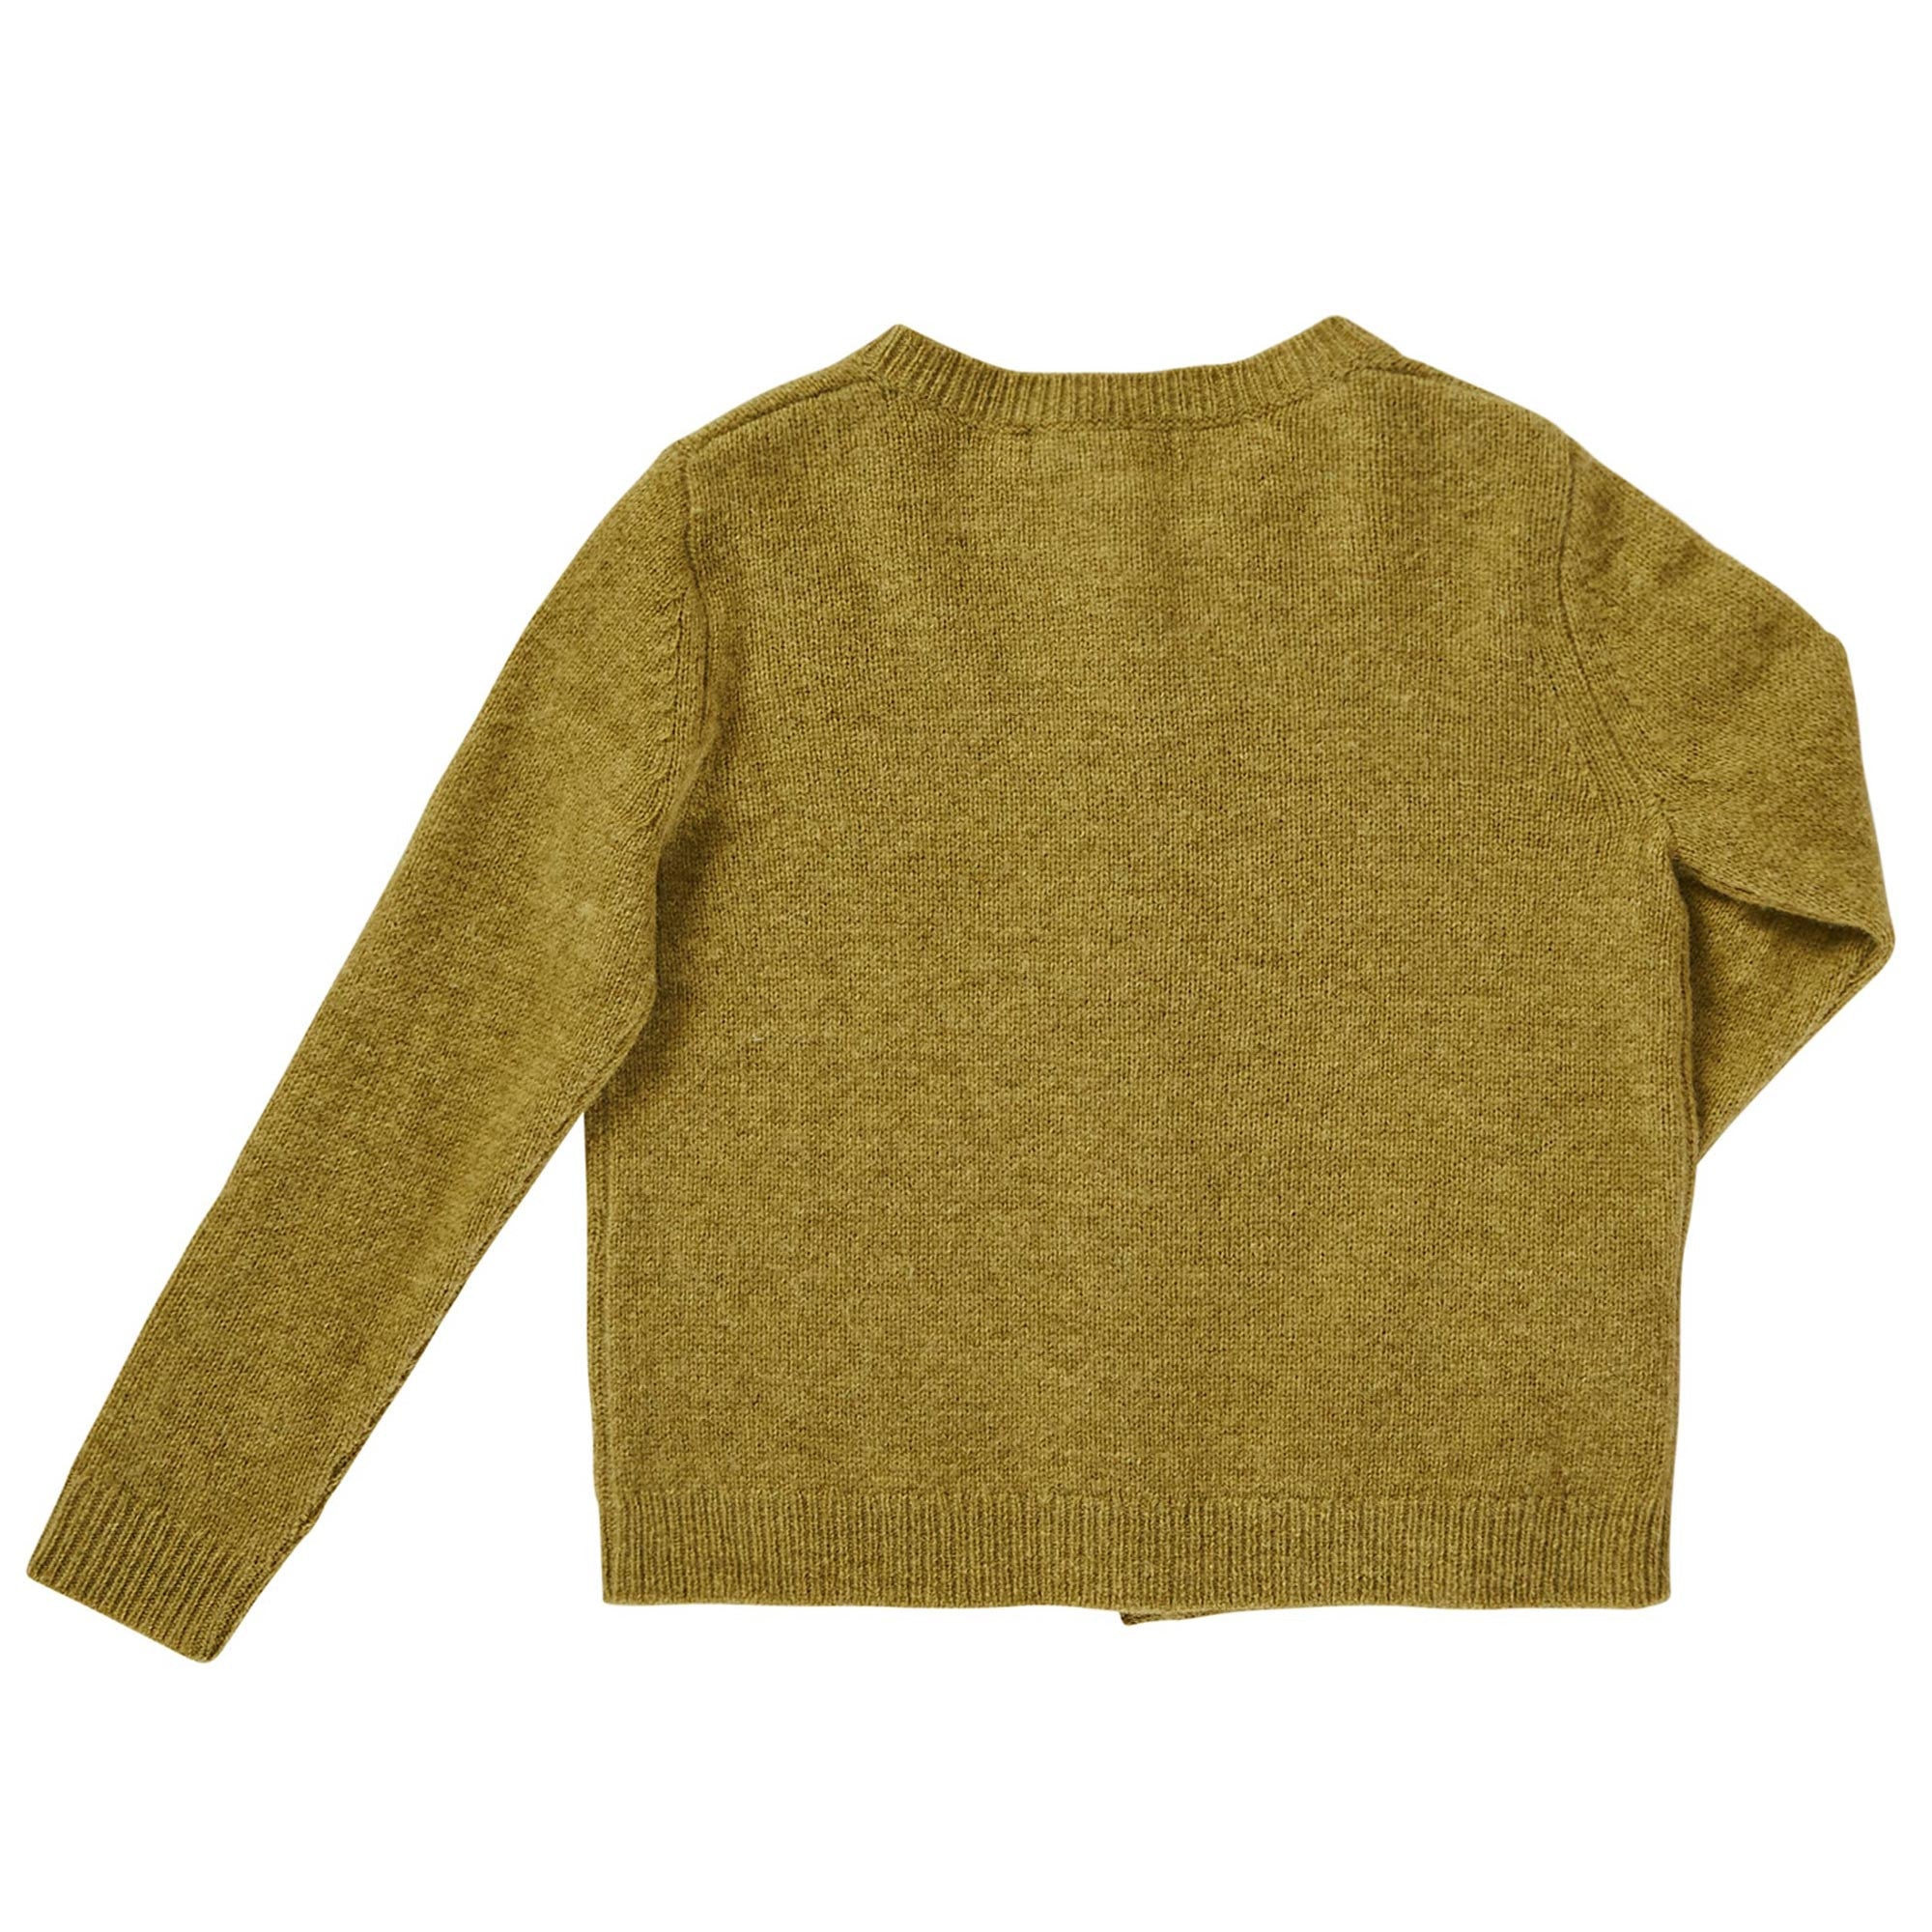 Baby Yellow-green Knitted Wool Cardigan - CÉMAROSE | Children's Fashion Store - 2